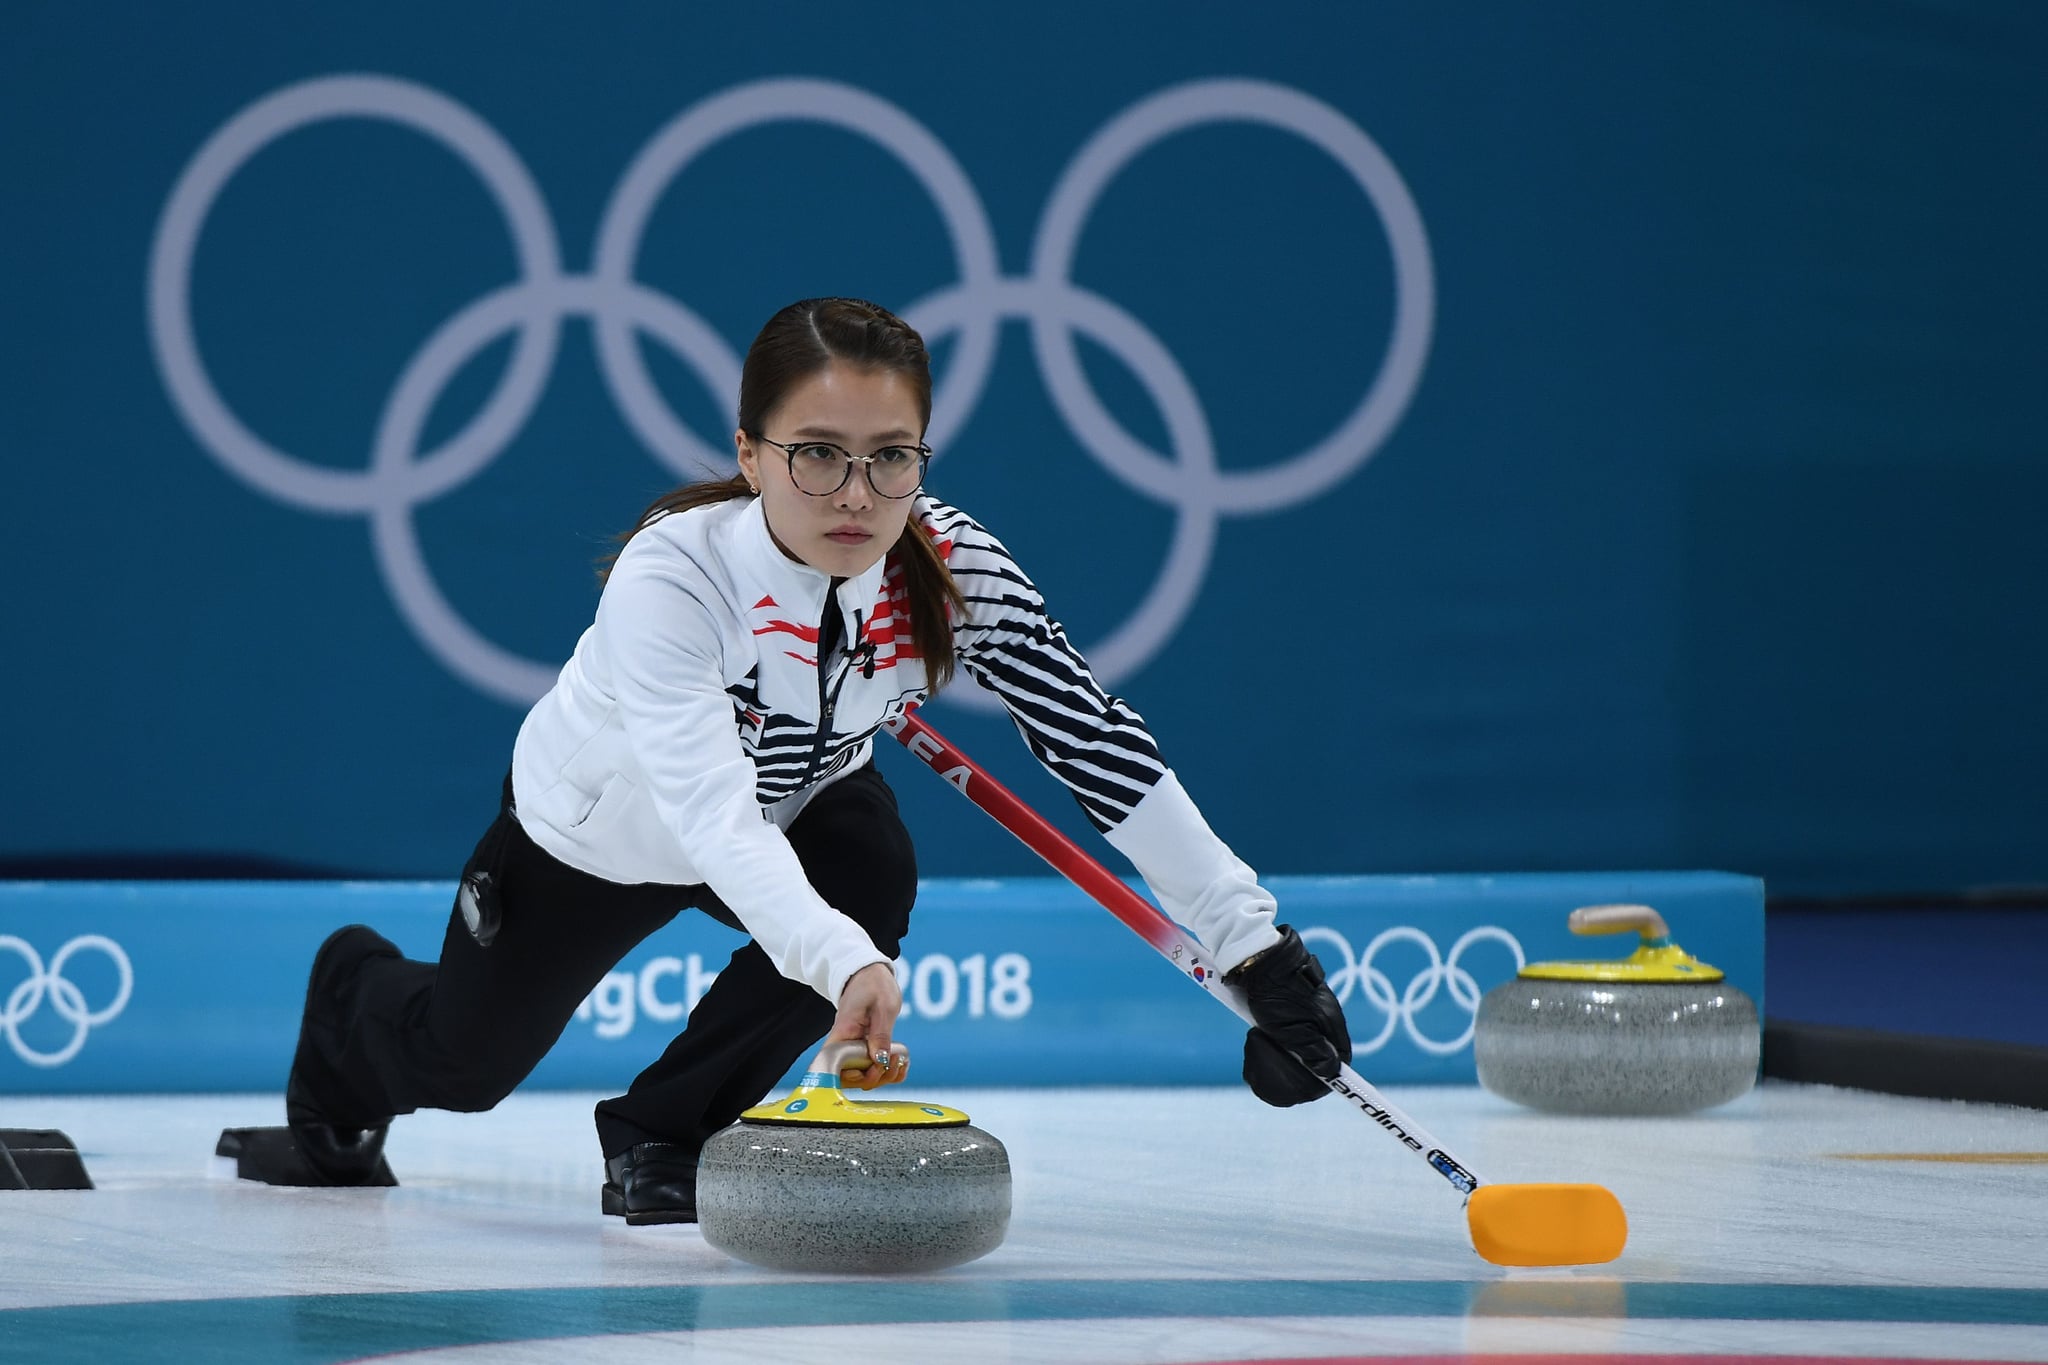 TOPSHOT - South Korea's Kim Eunjung throws the stone during the curling women's gold medal game between South Korea and Sweden during the Pyeongchang 2018 Winter Olympic Games at the Gangneung Curling Centre in Gangneung on February 25, 2018. / AFP PHOTO / WANG Zhao        (Photo credit should read WANG ZHAO/AFP via Getty Images)